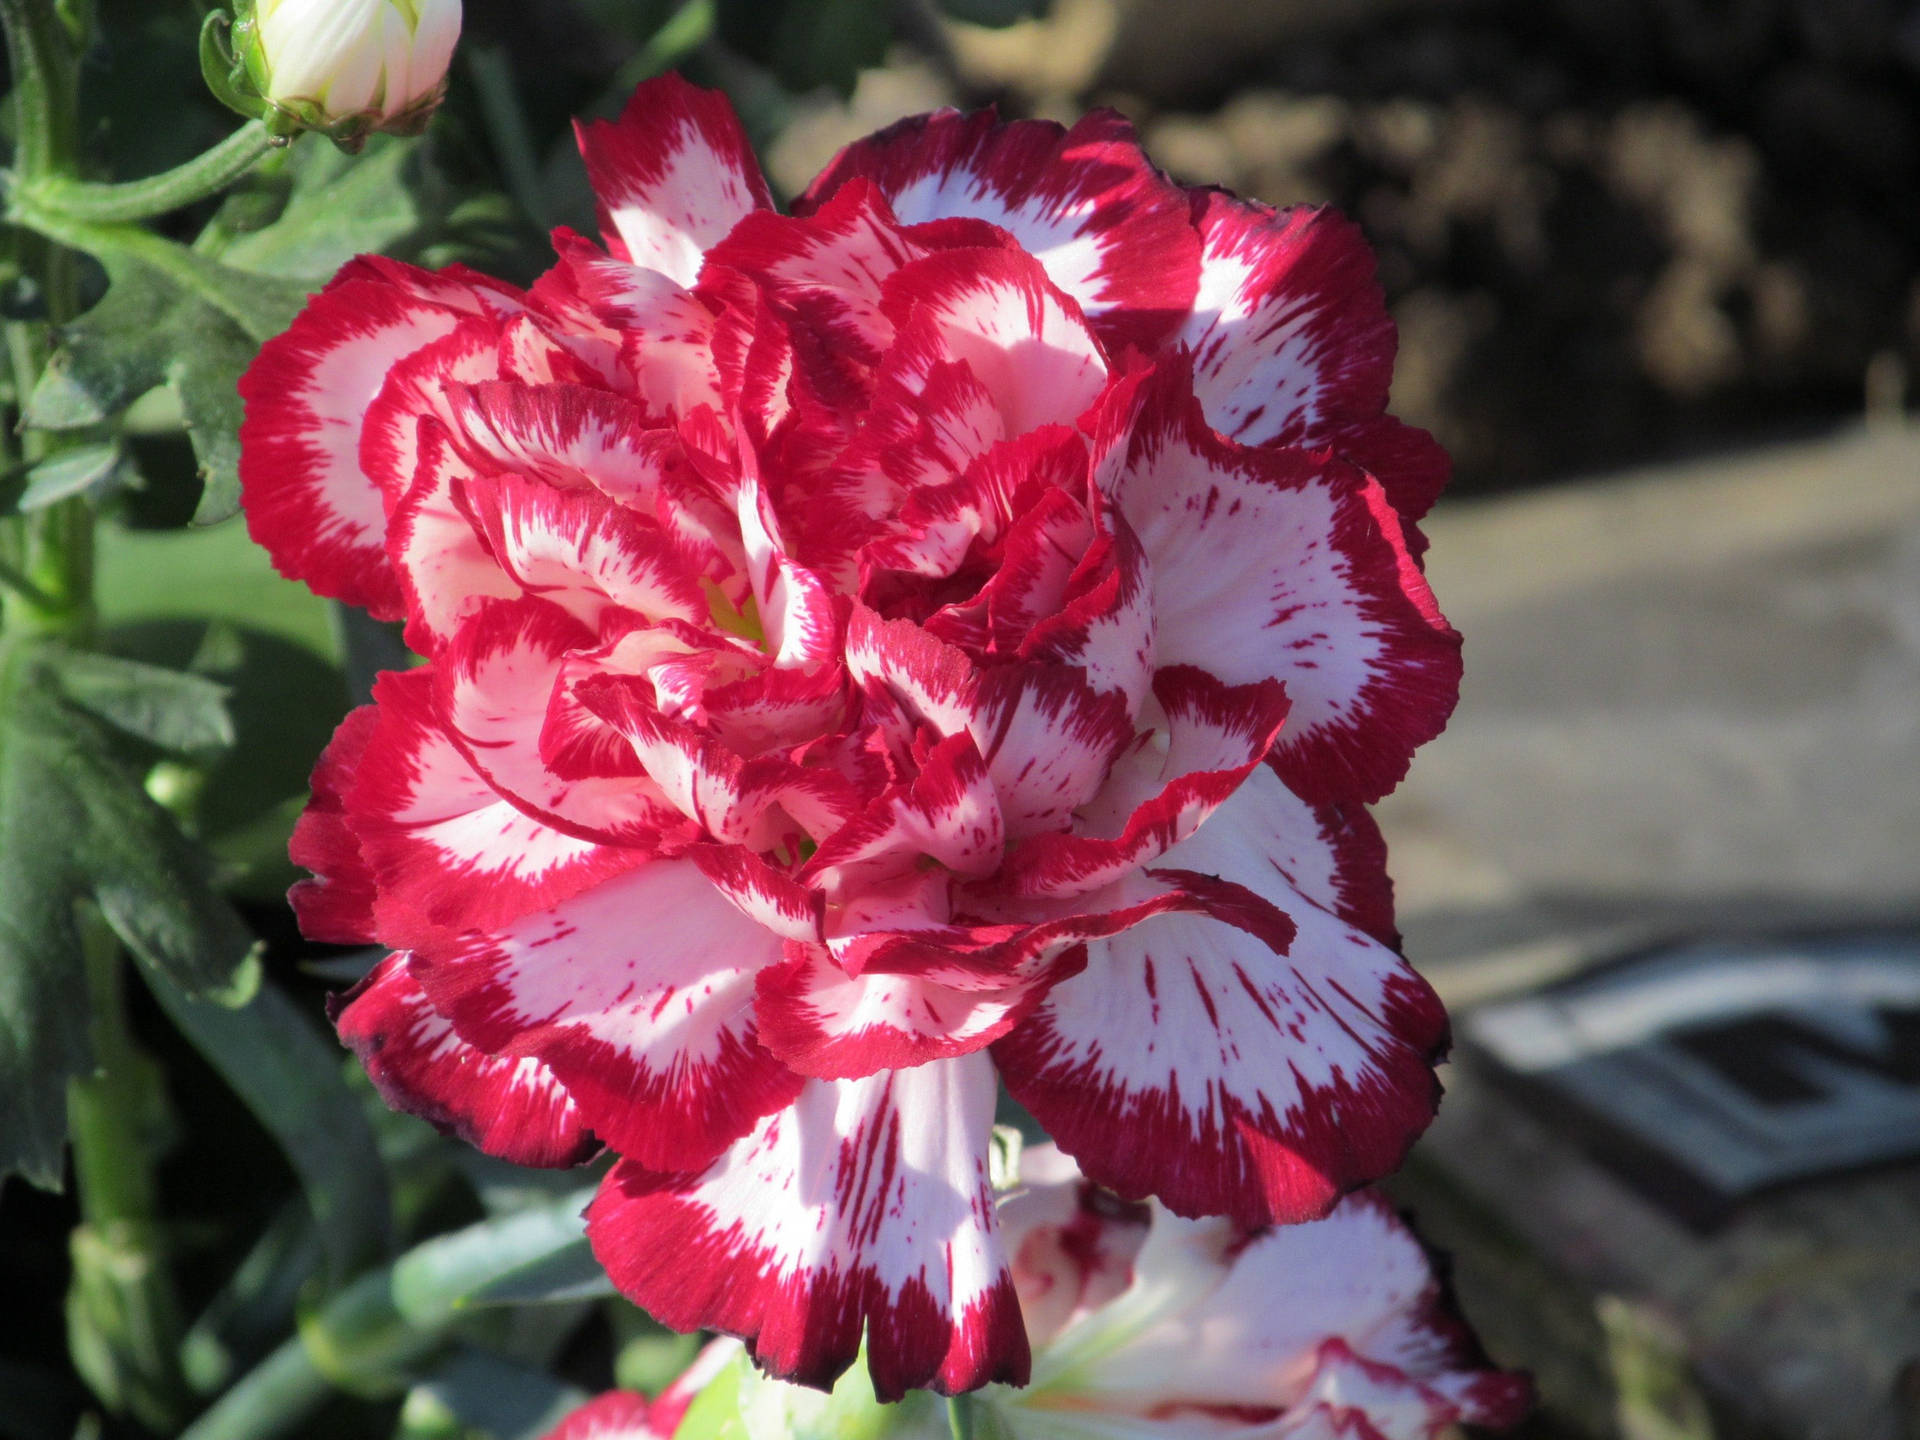 Striking Red And White Carnation Flower